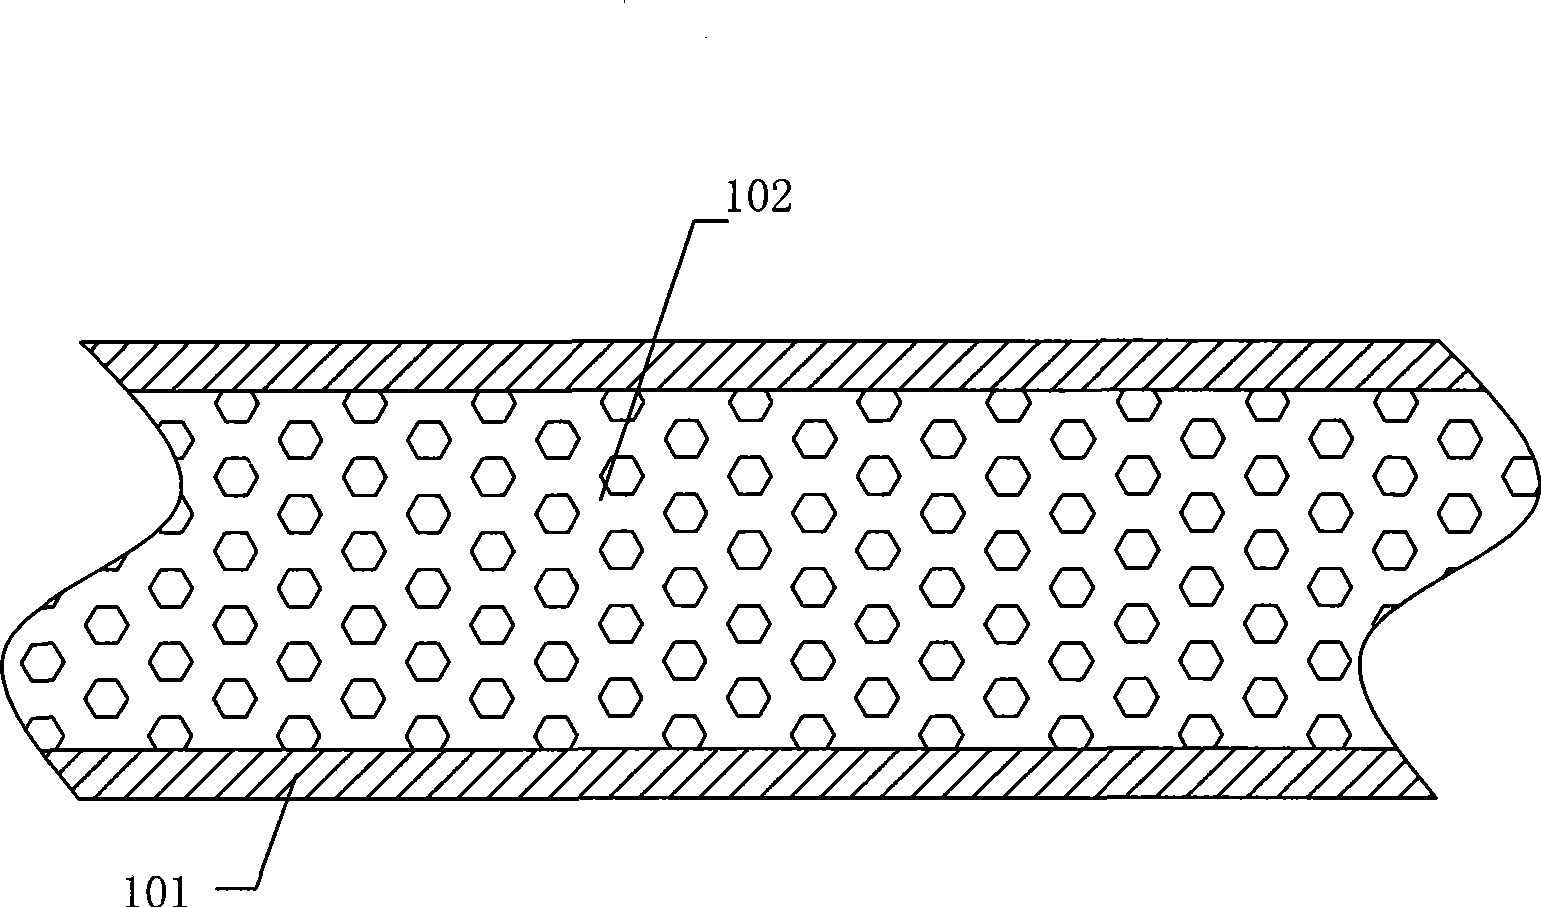 Locomotor manufacture method and products thereof